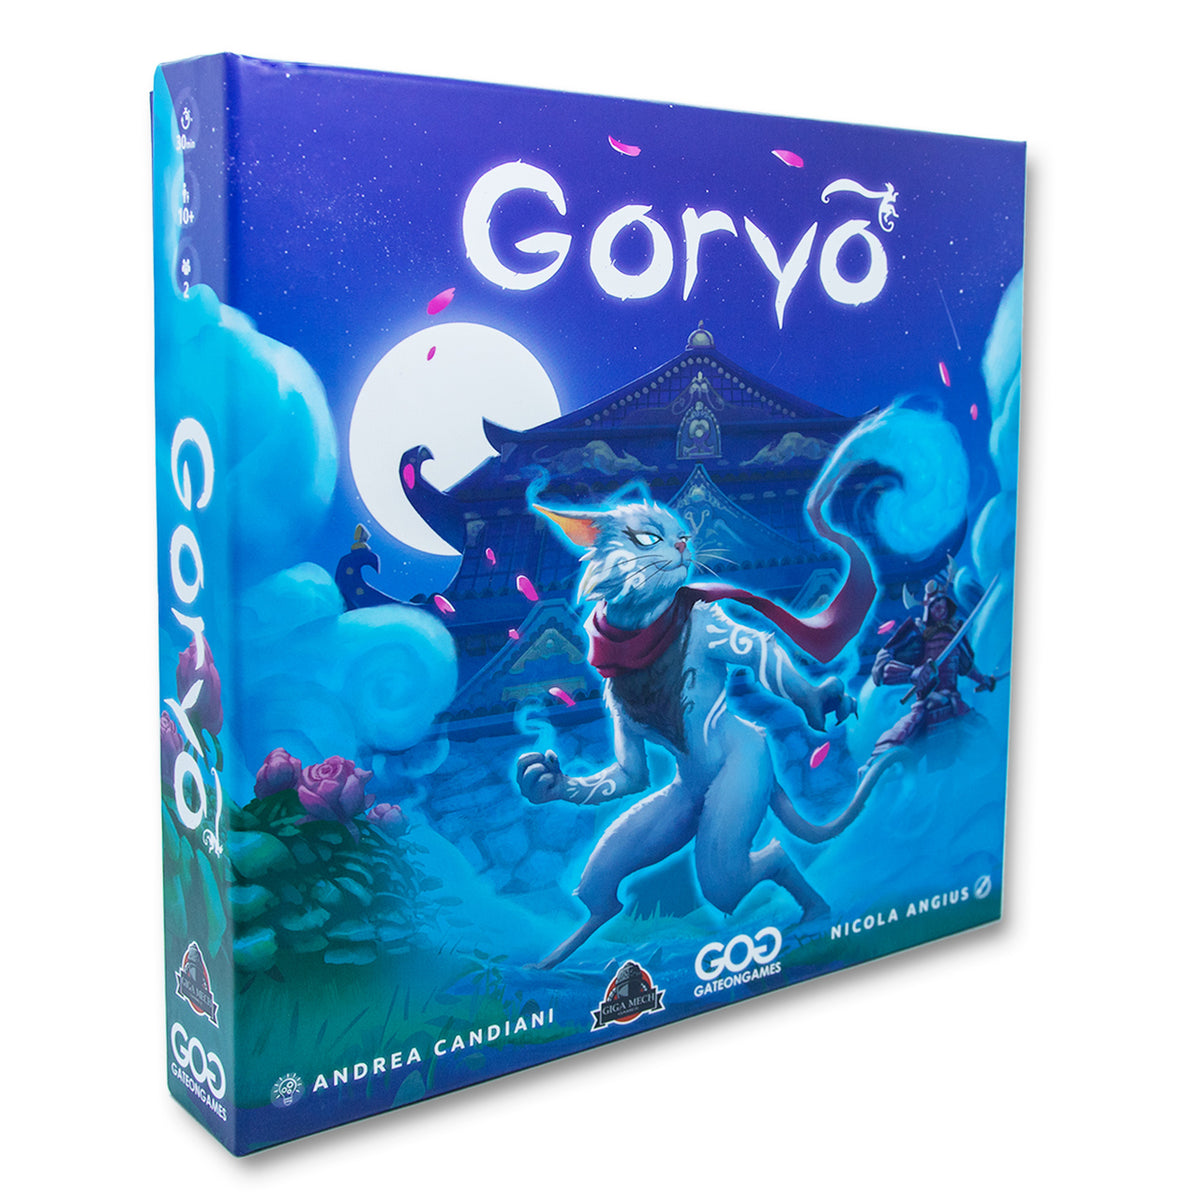 Goryo: an Asymmetrical Game of Investigation and Deduction for 2 Players